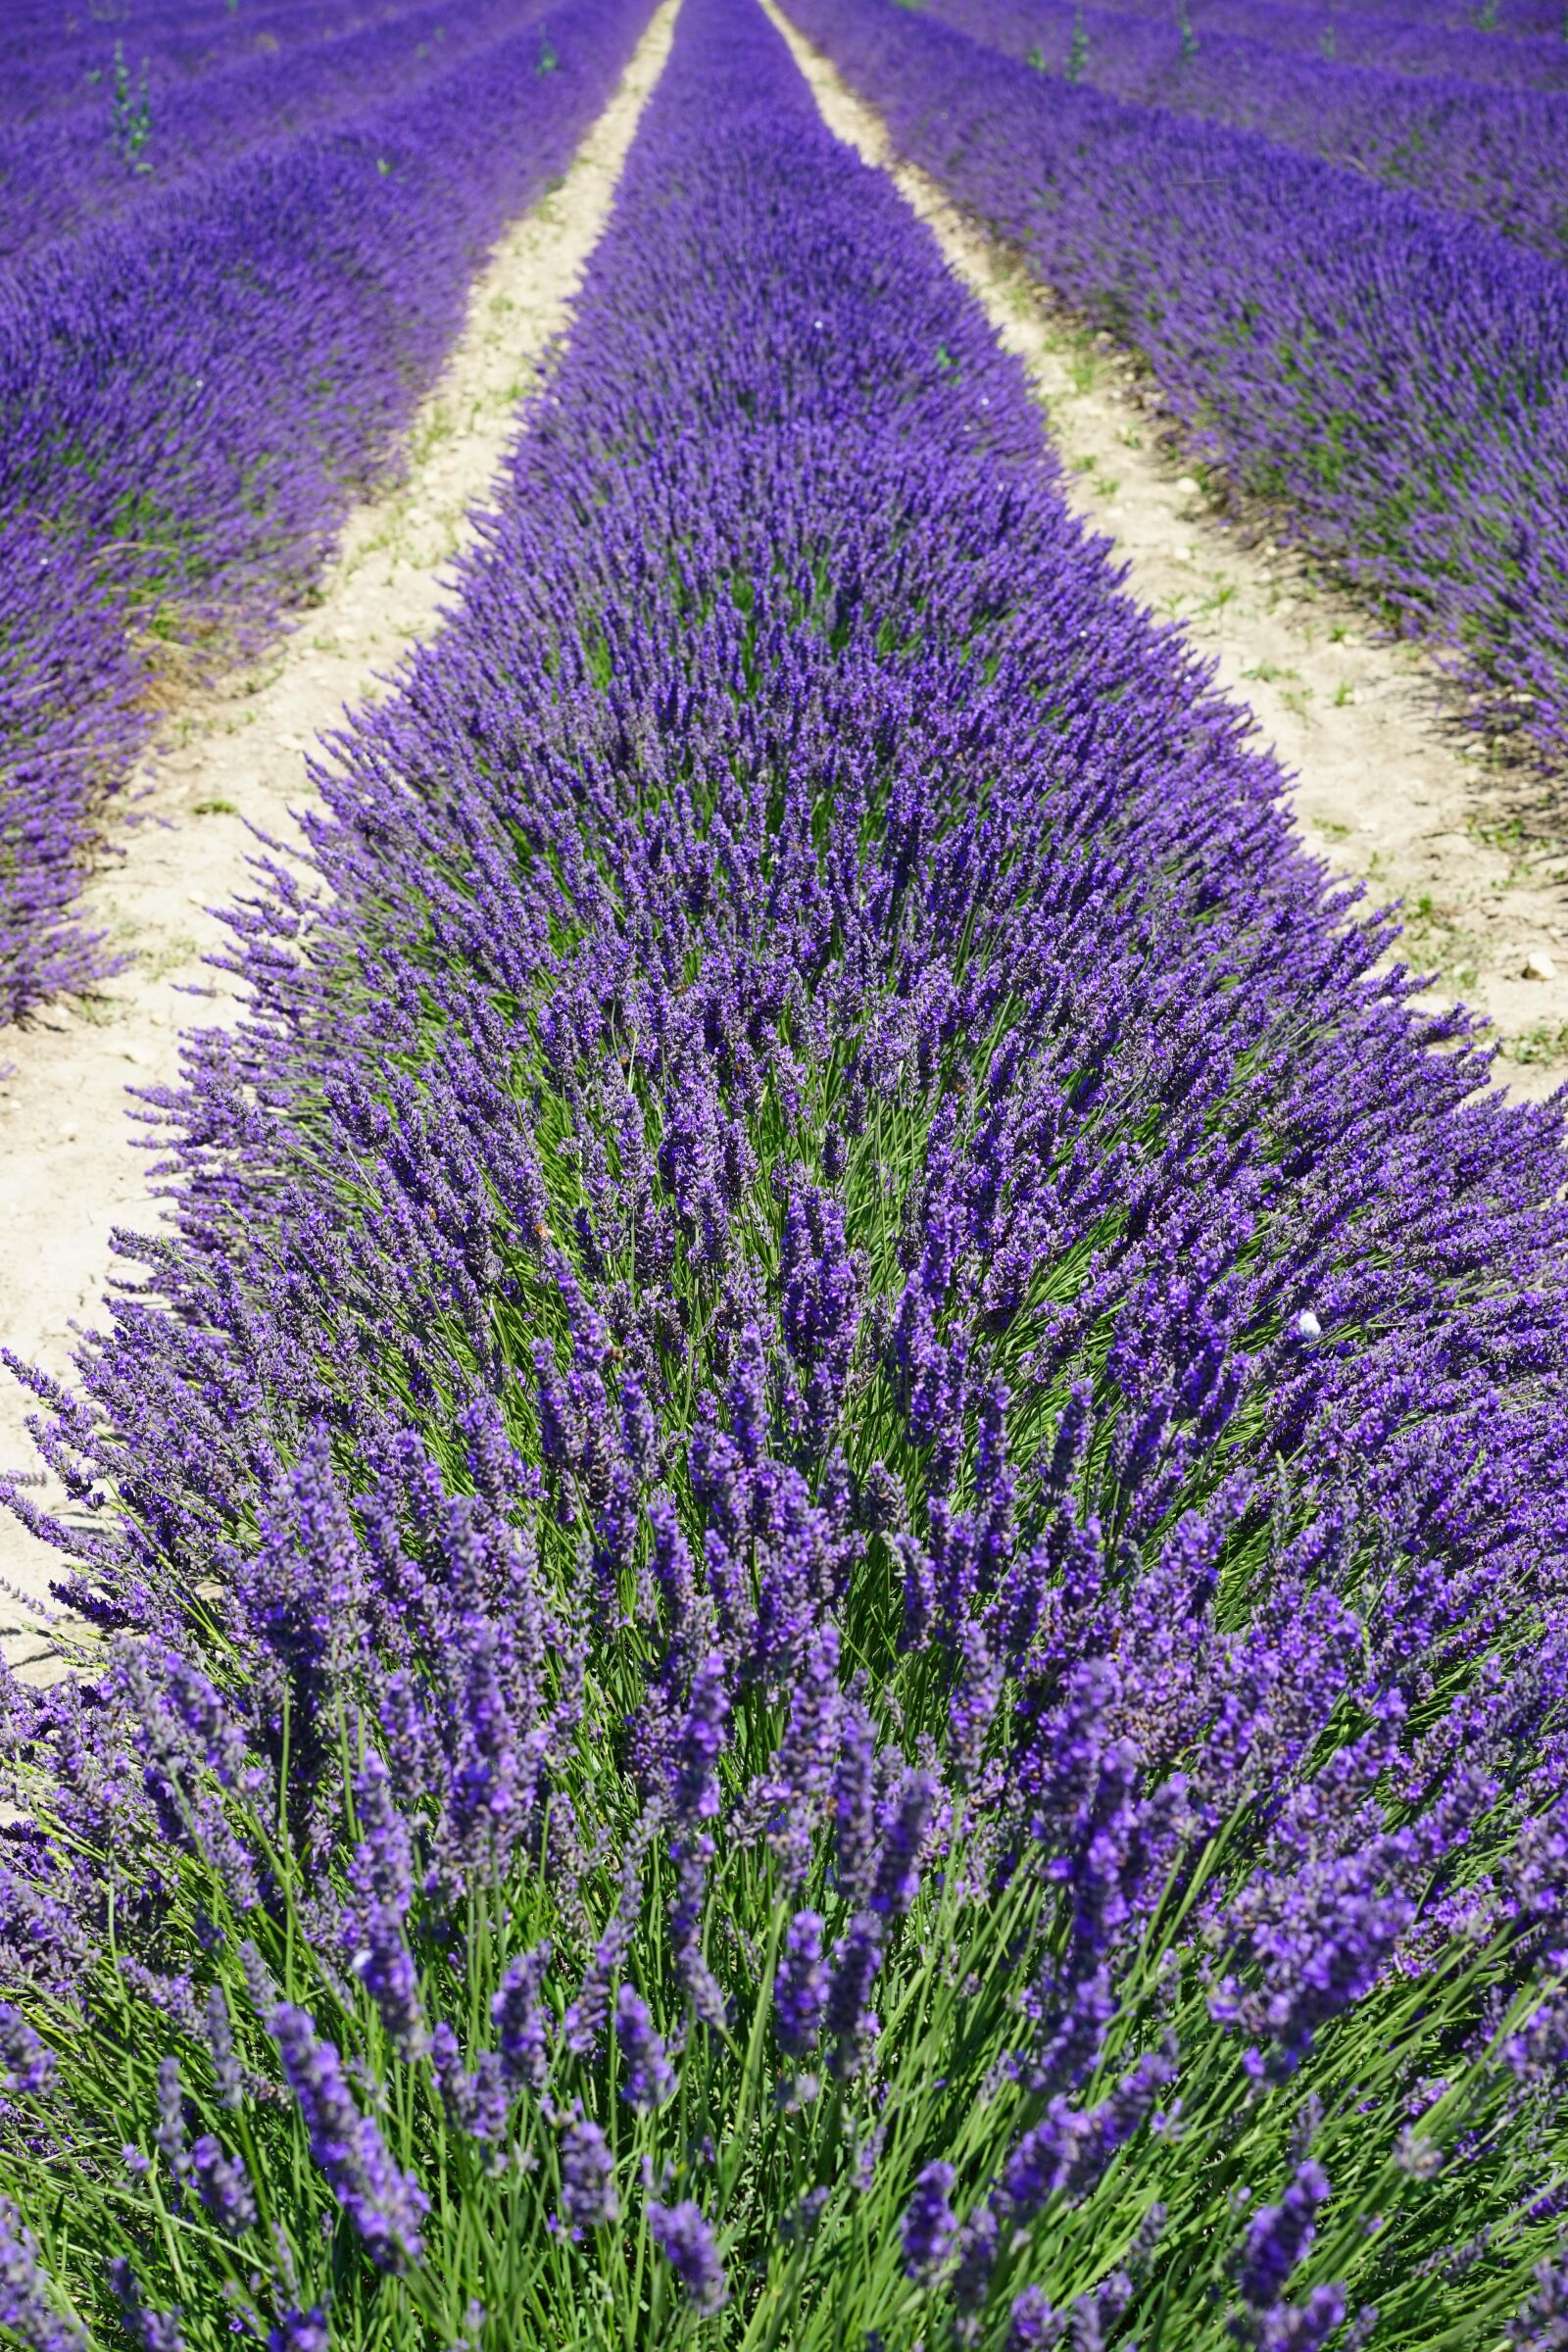 Sony a7 sample photo. Lavender field, lane, away photography